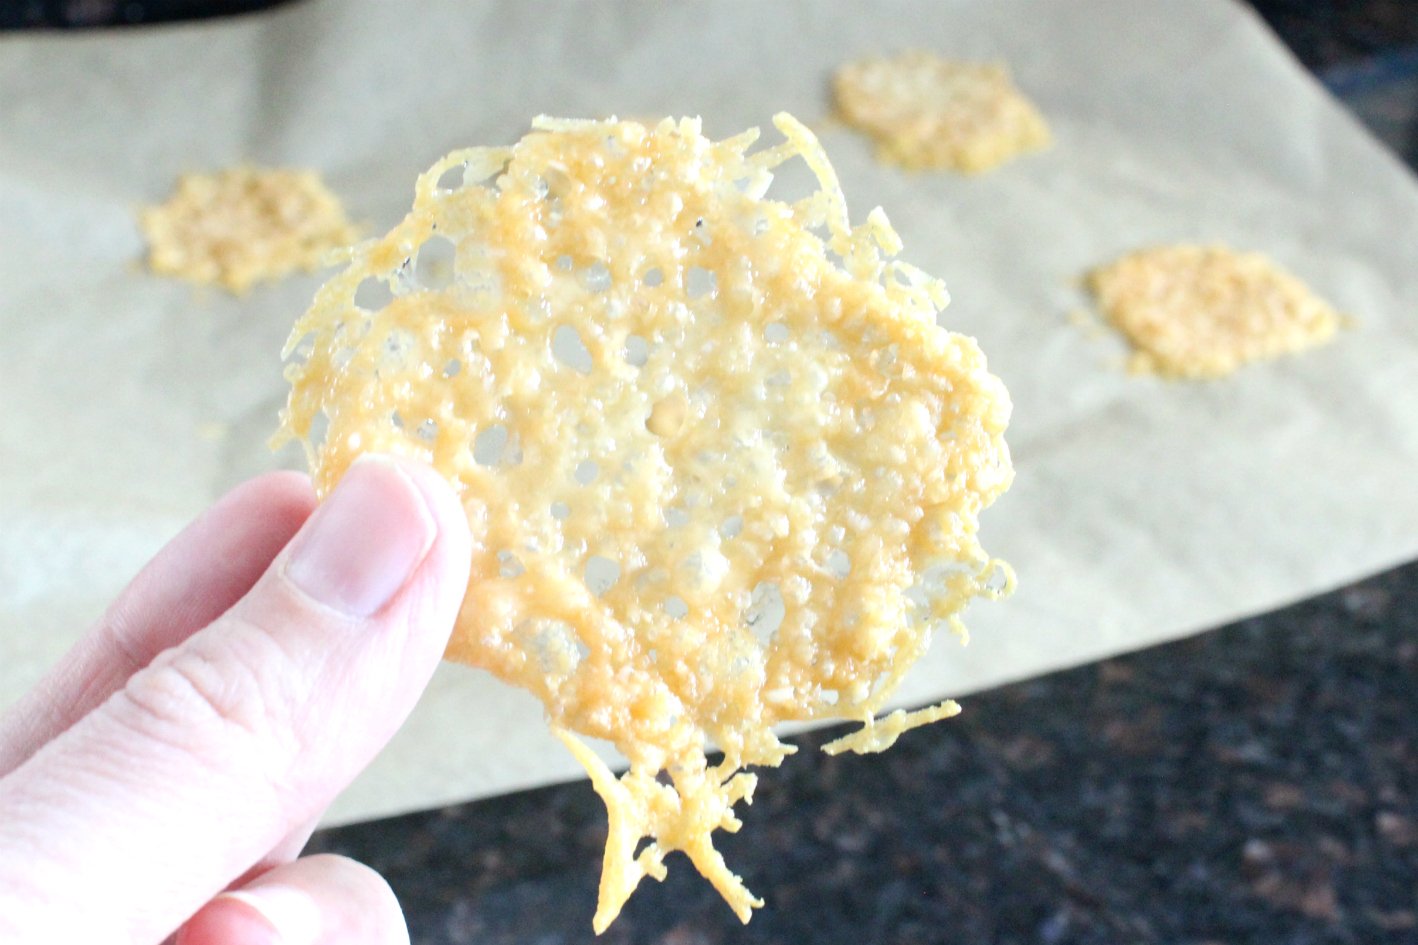 Easy Baked Parmesan Cheese Crisps (Keto, GAPS, Low Carb)